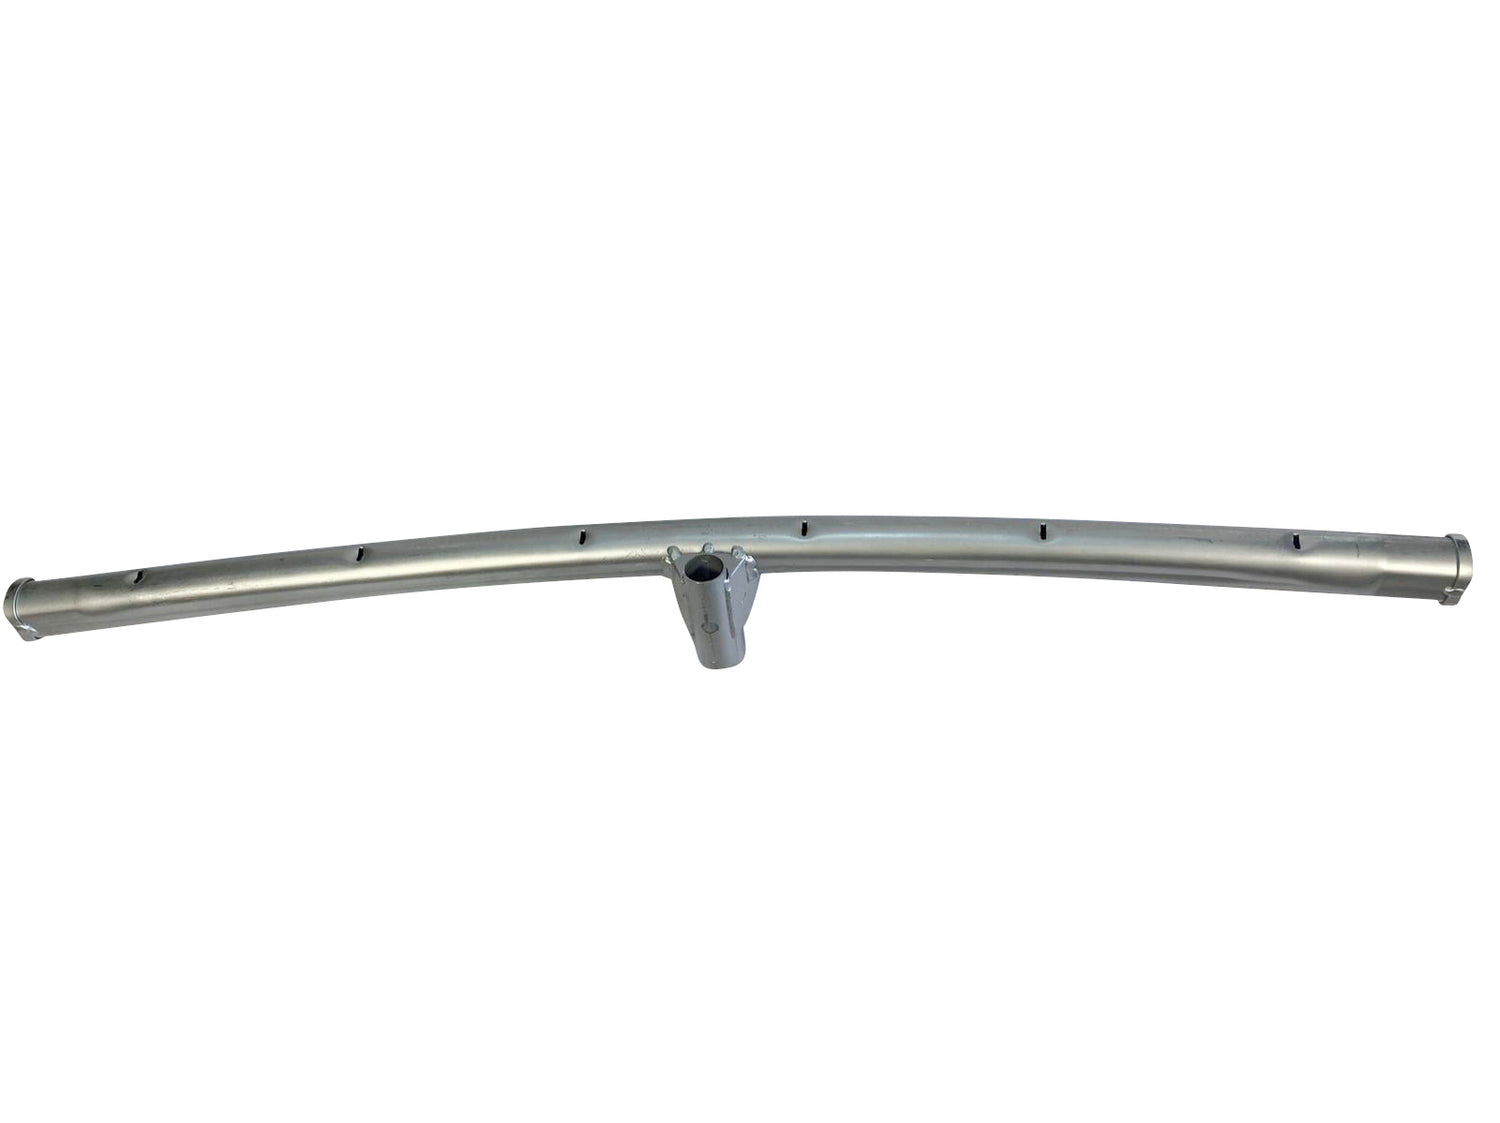 Ultima 5 12ft x 8ft Rectangular Trampoline Part Number 26 - Curved Top Rail with Leg Socket (Middle)